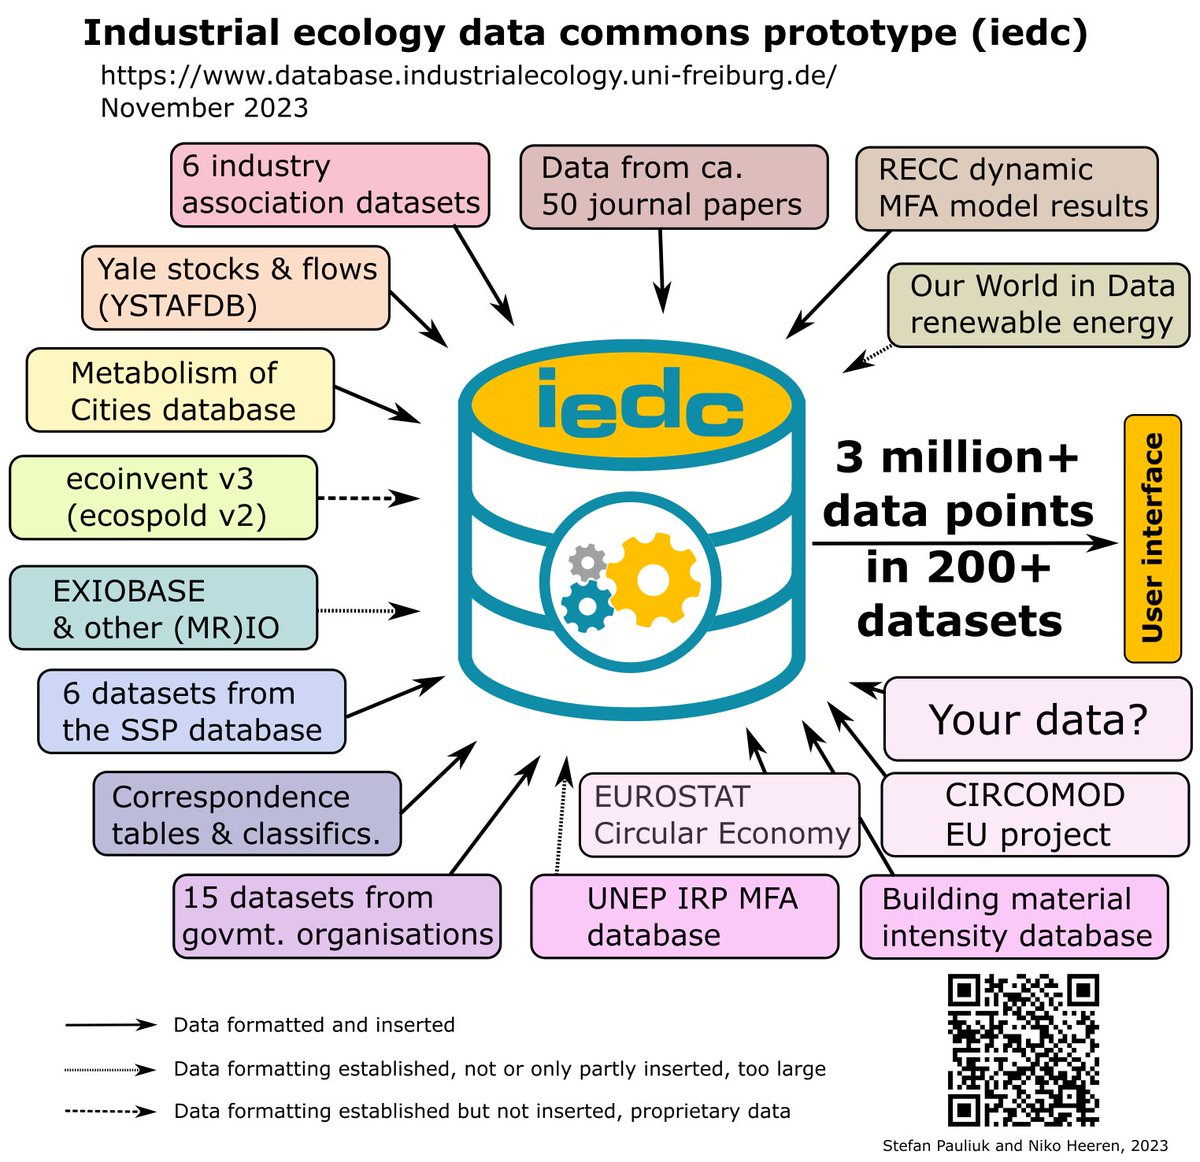 Happy to announce a major update of the #industrialecology data commons #iedc, an open database for the broad variety of quantitative IE data! …ase.industrialecology.uni-freiburg.de + new data from ca. 10 journal papers, EUROSTAT CE, and OWID + new search interface! #opendata #openscience